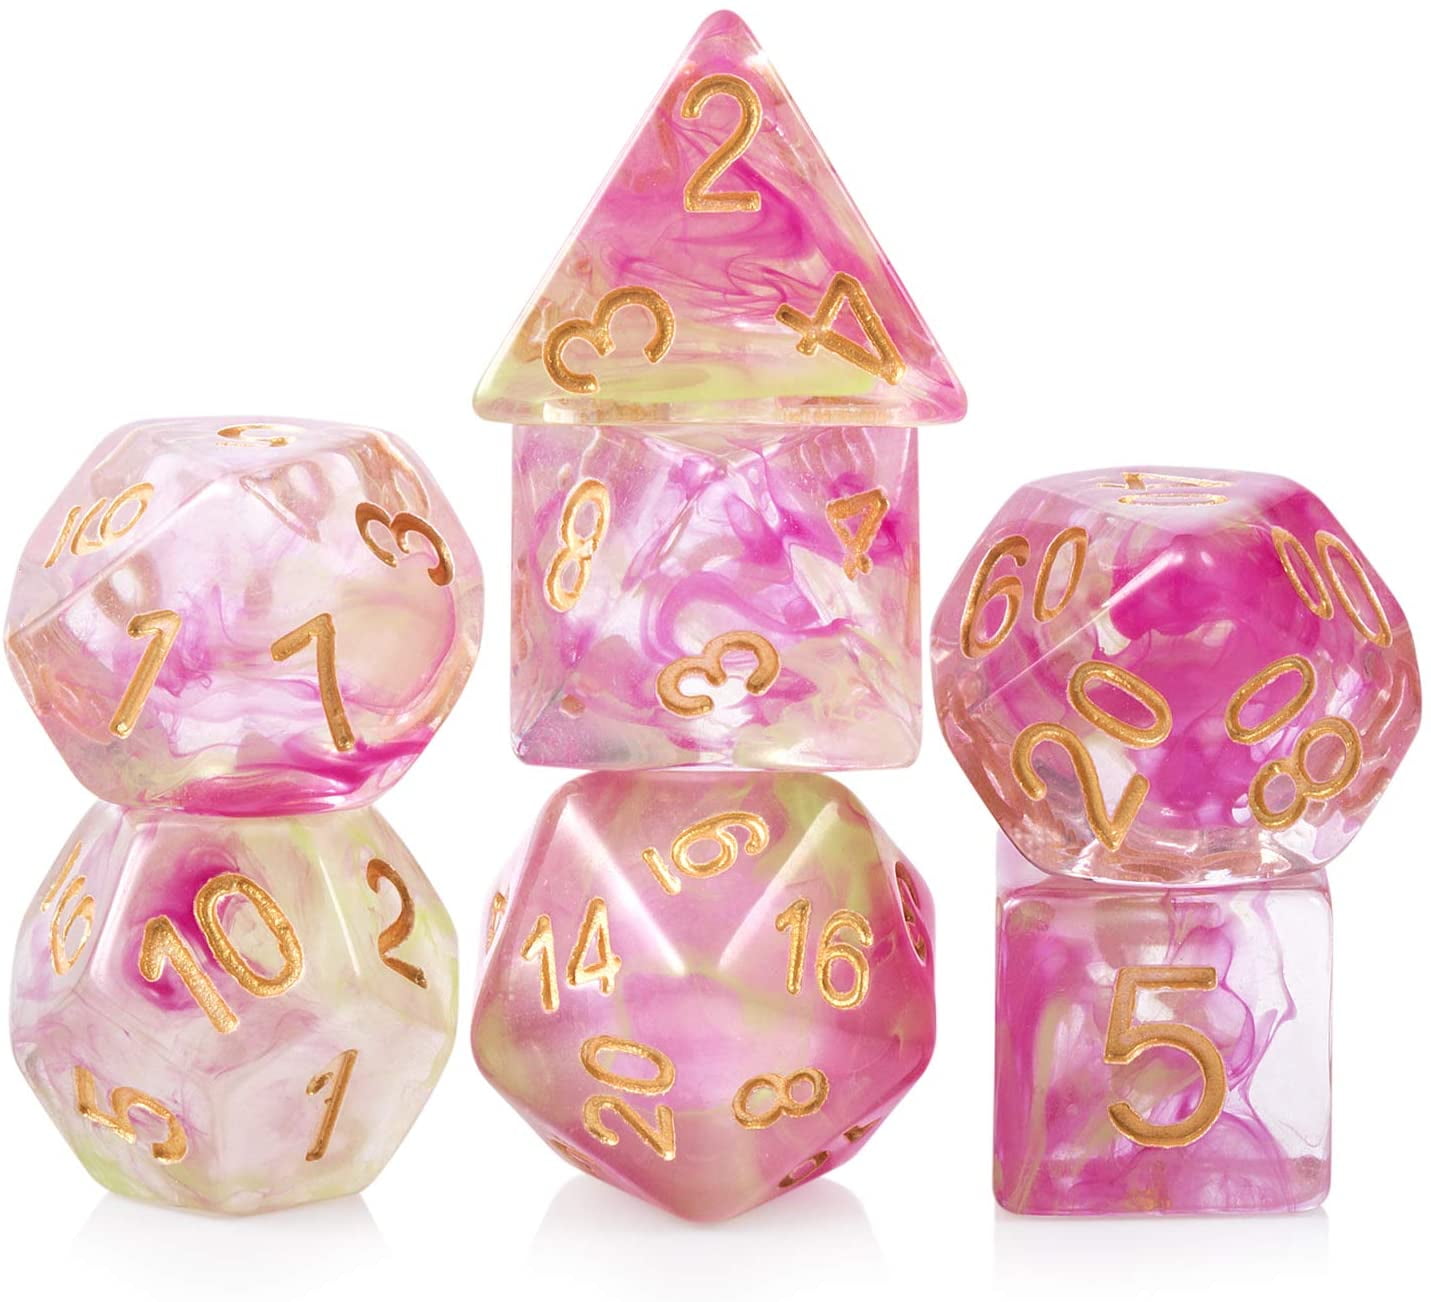 3 Matching Bags Pink Yellow Green Marble 3 NEW Sets of 7 Polyhedral Dice 